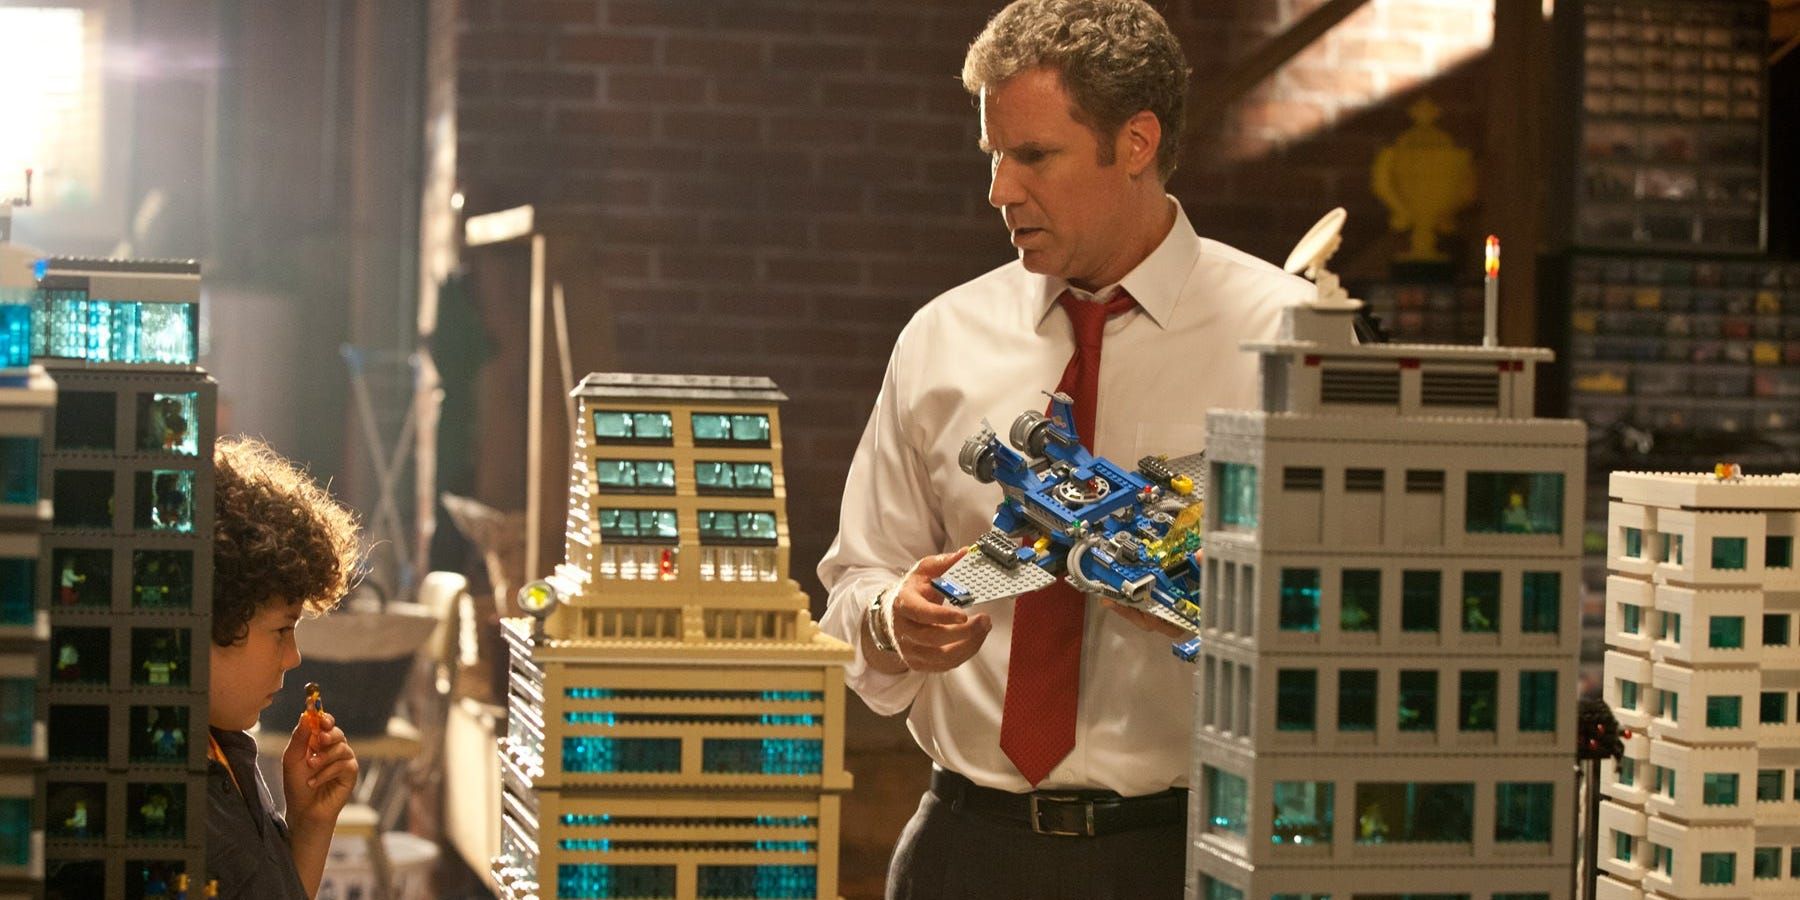 Will Ferrell plays with Lego with his son in The Lego Movie